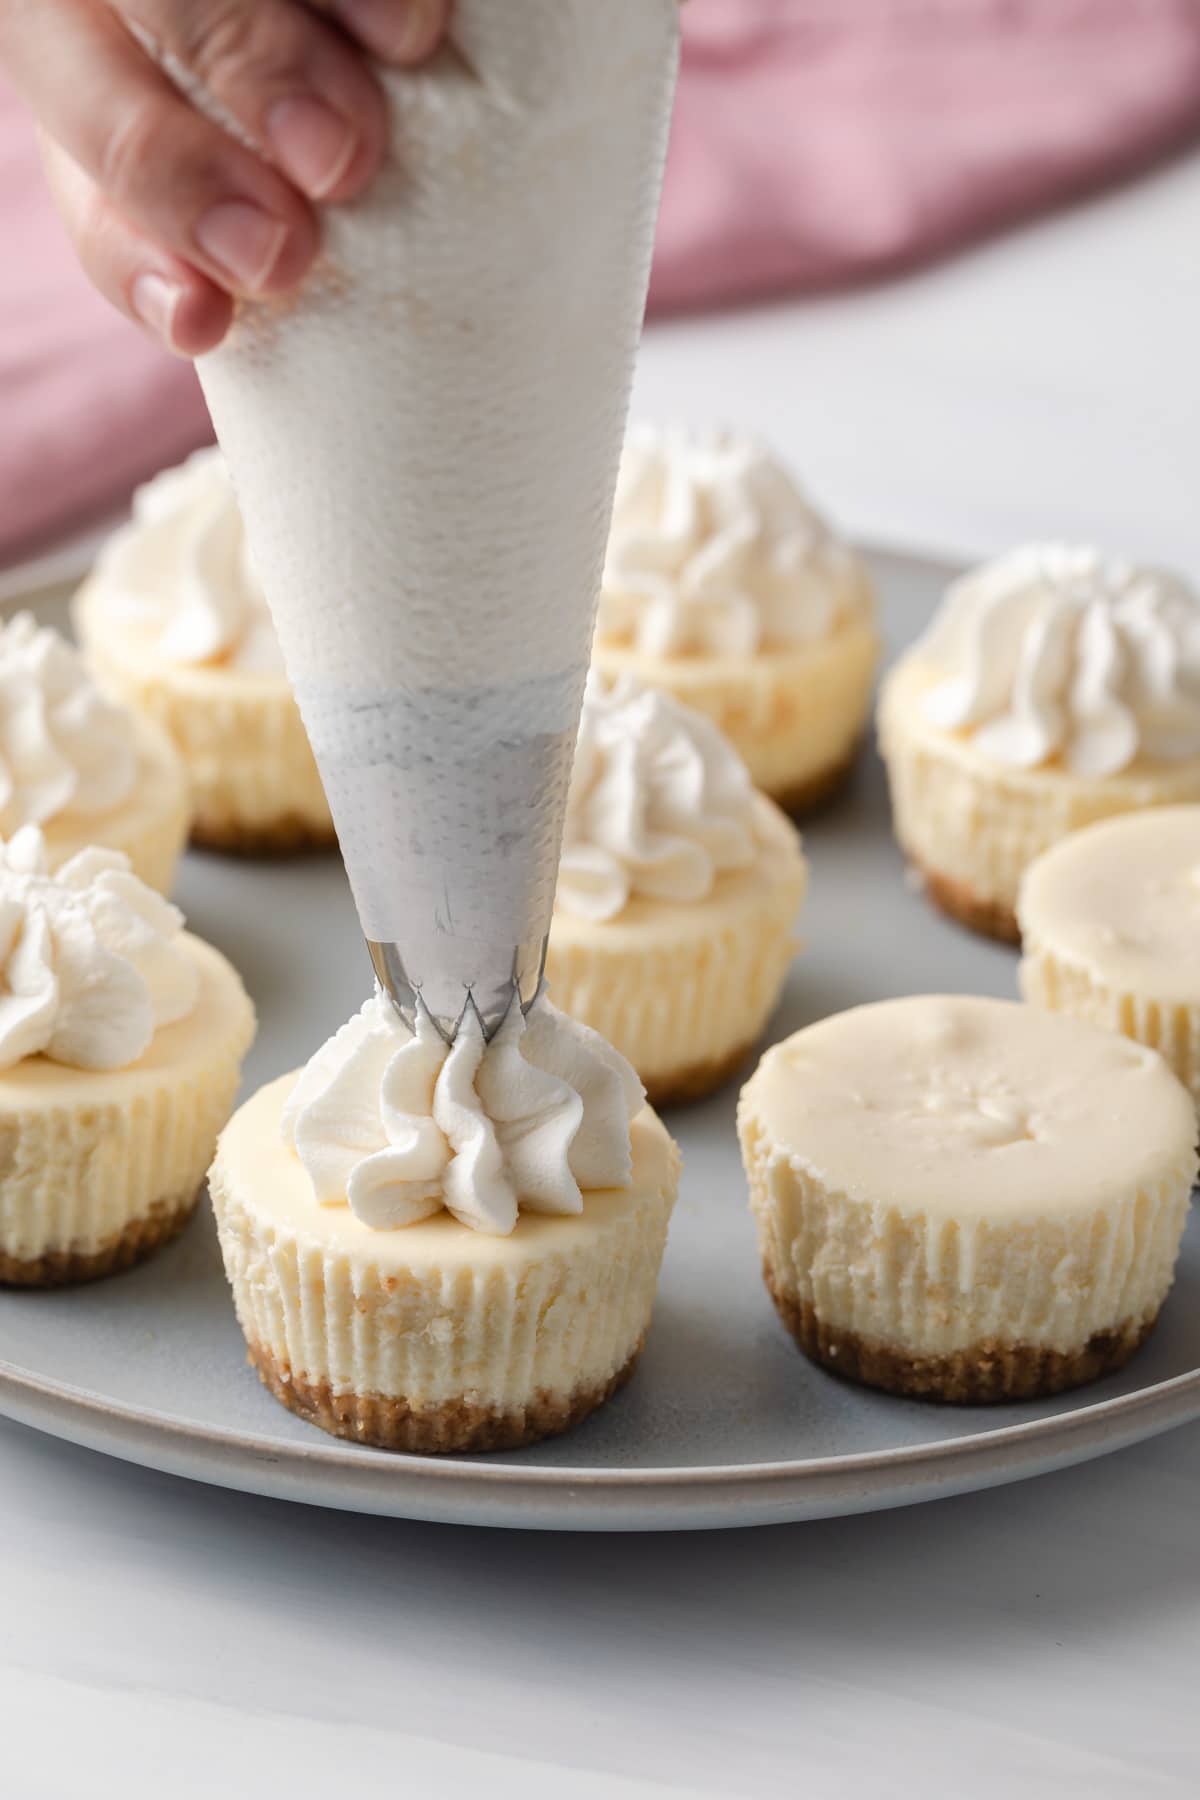 whipped cream being piped over mini cheesecakes